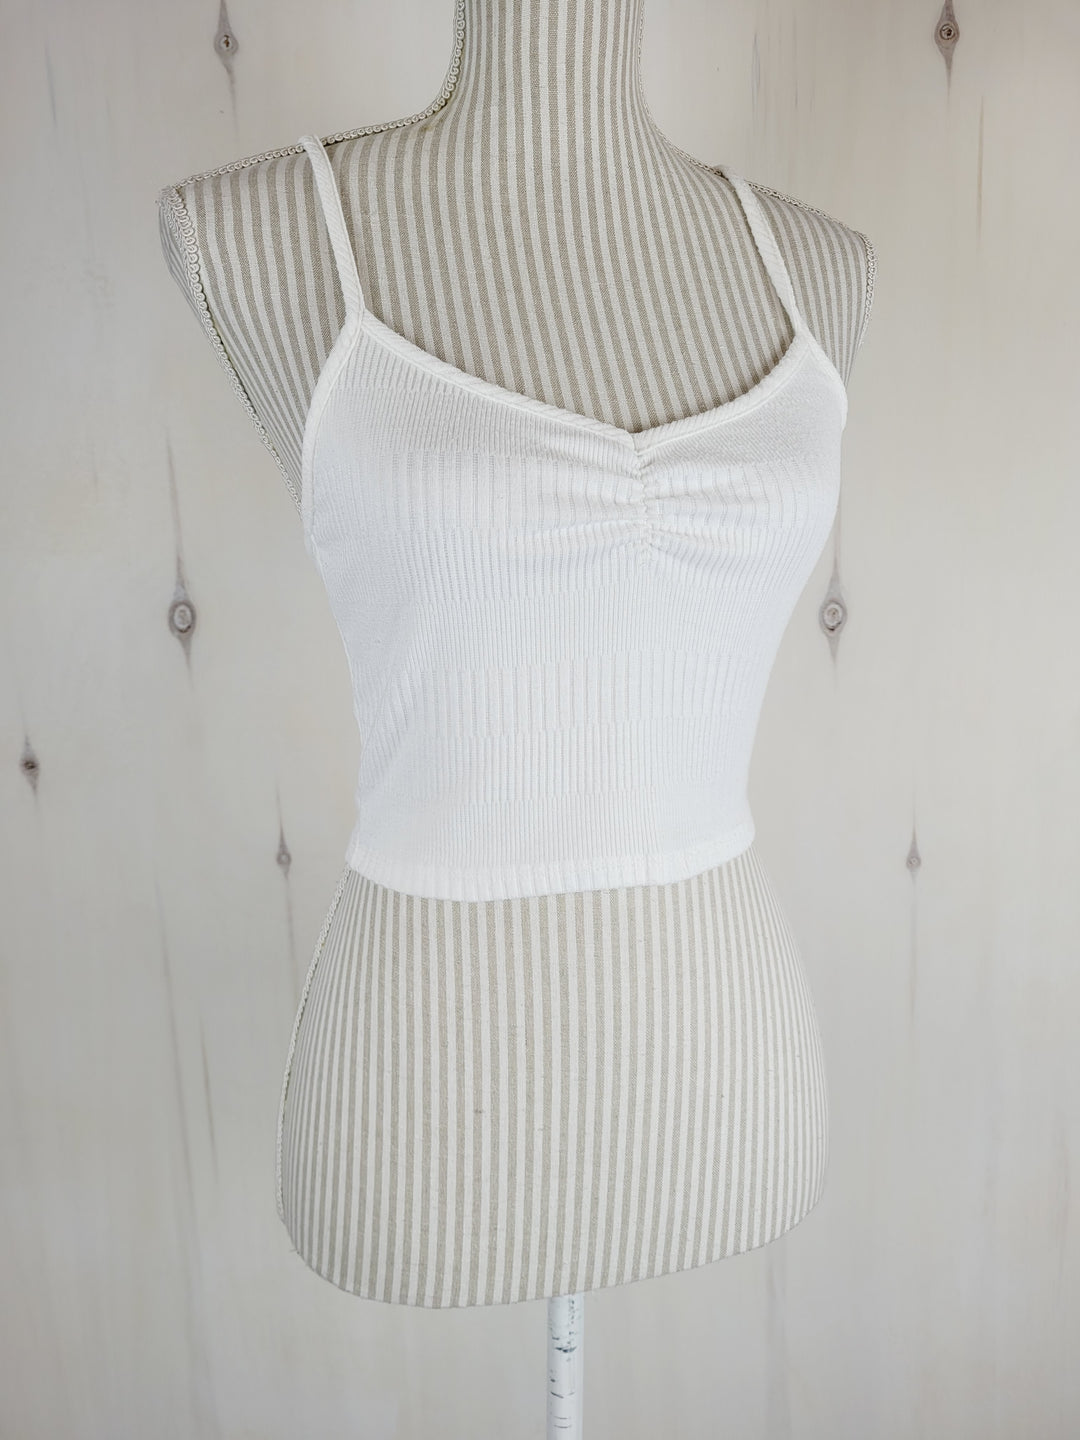 WHITE CROPPED TOP APPROX LADIES SMALL EUC